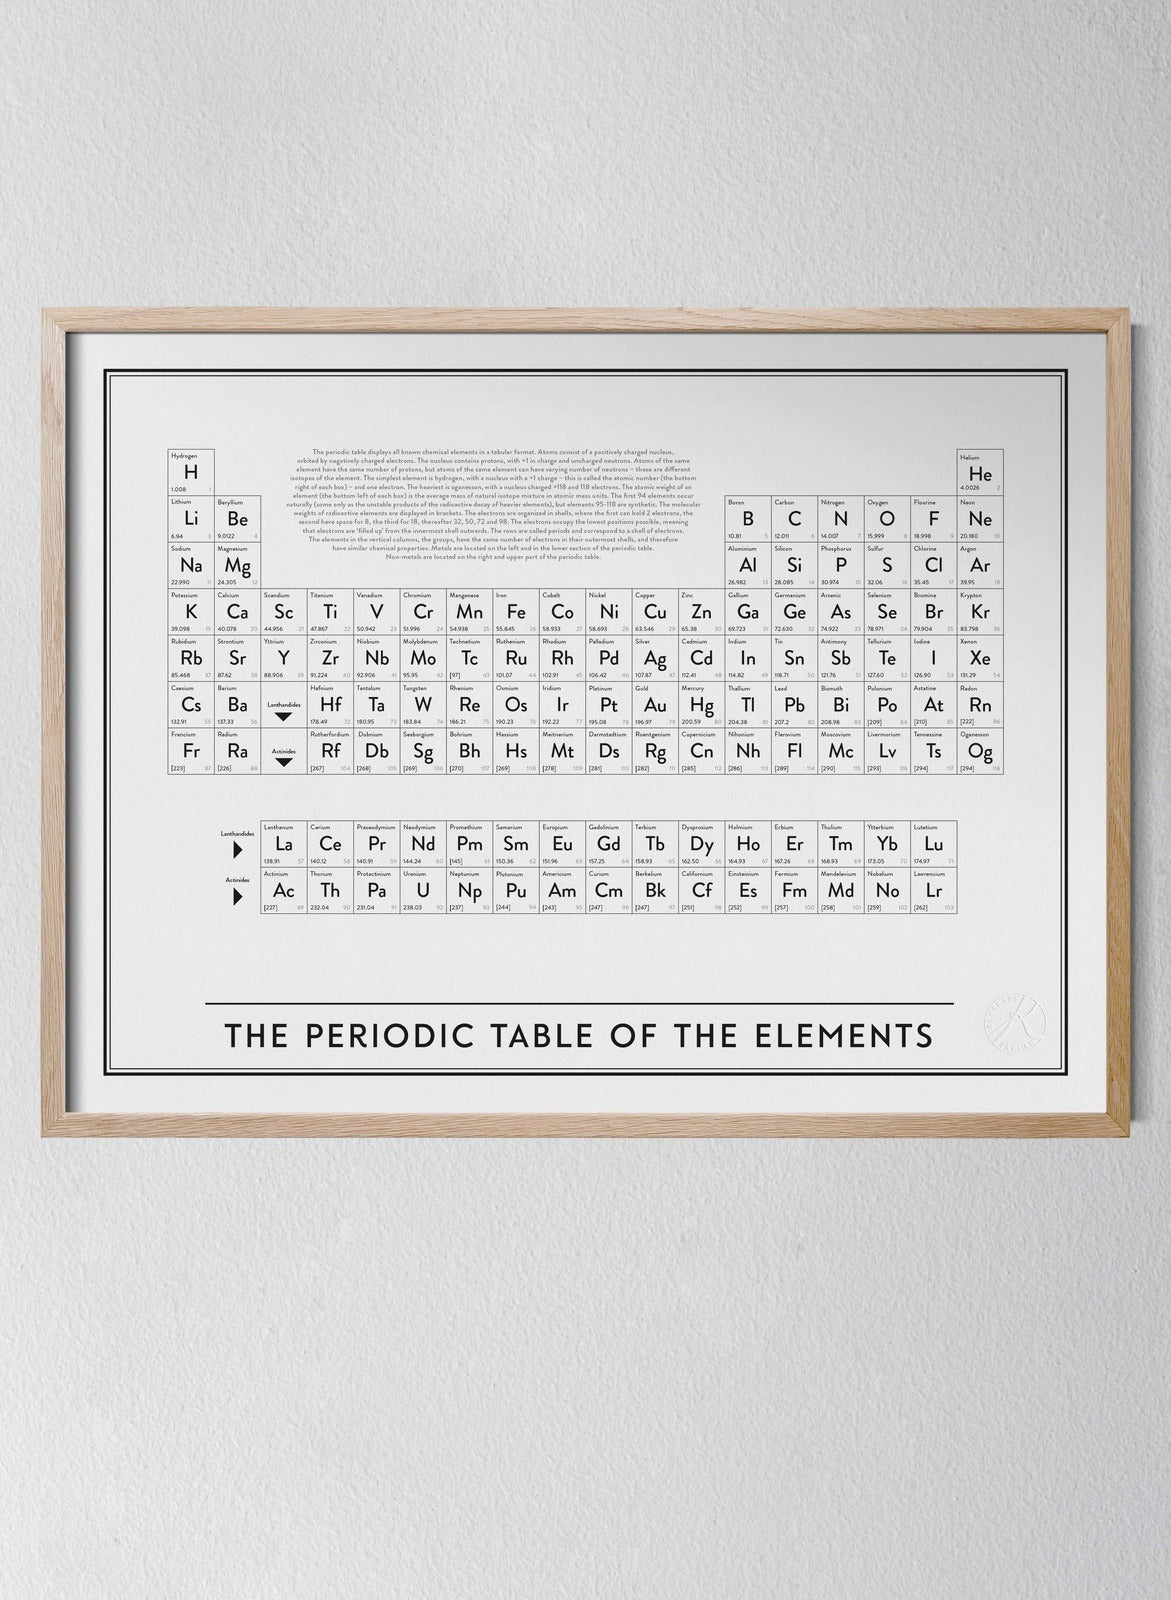 The periodic table of the elements - Poster